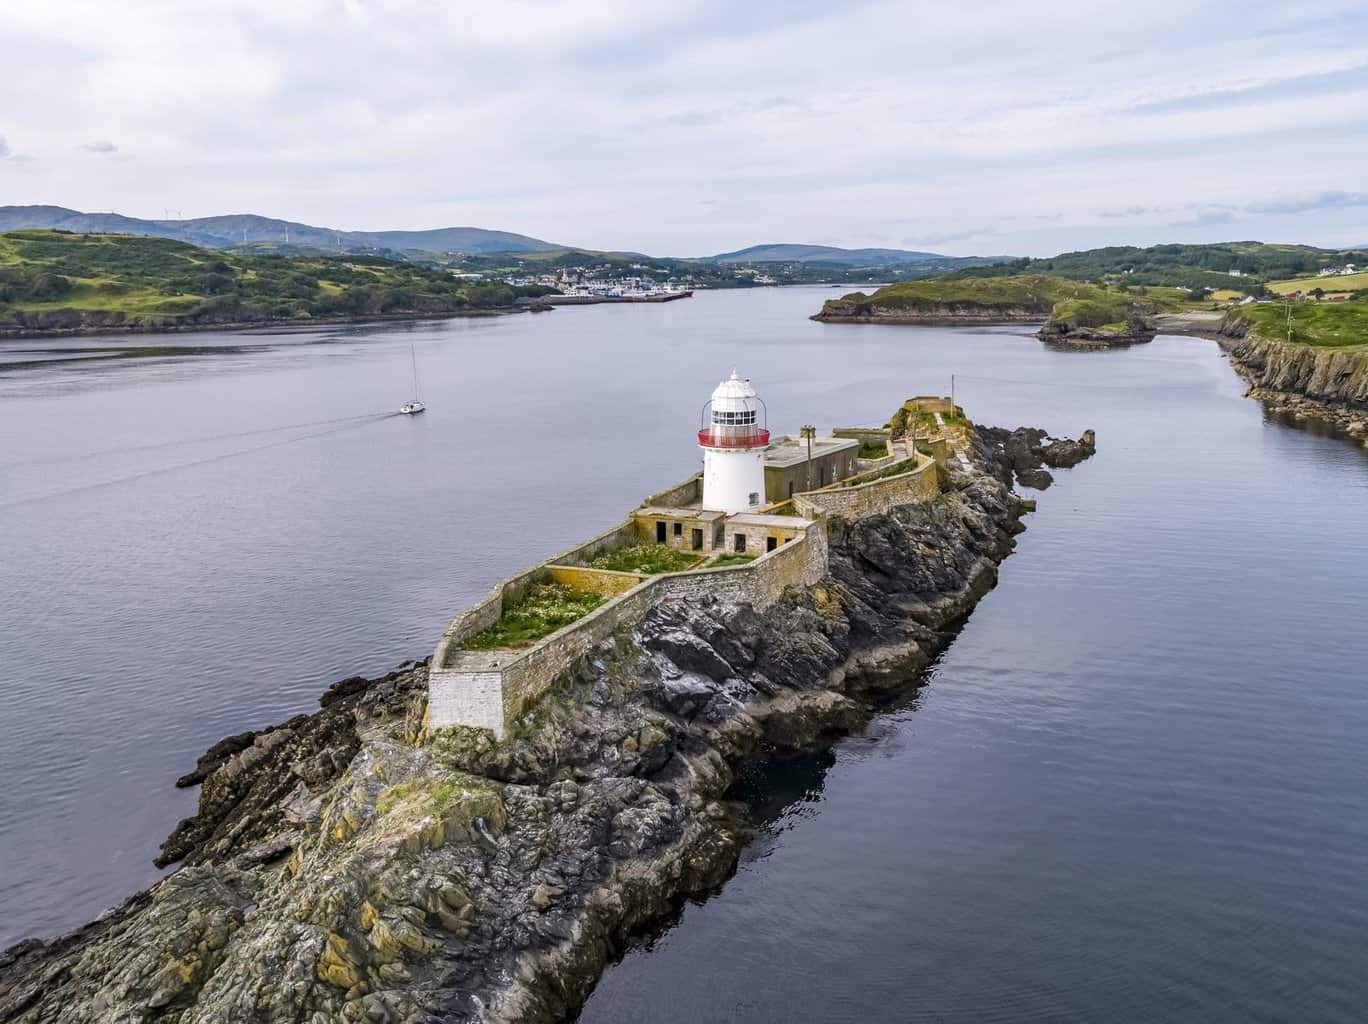 Aerial of the Rotten Island Lighthouse with Killybegs in background - County Donegal - Ireland.